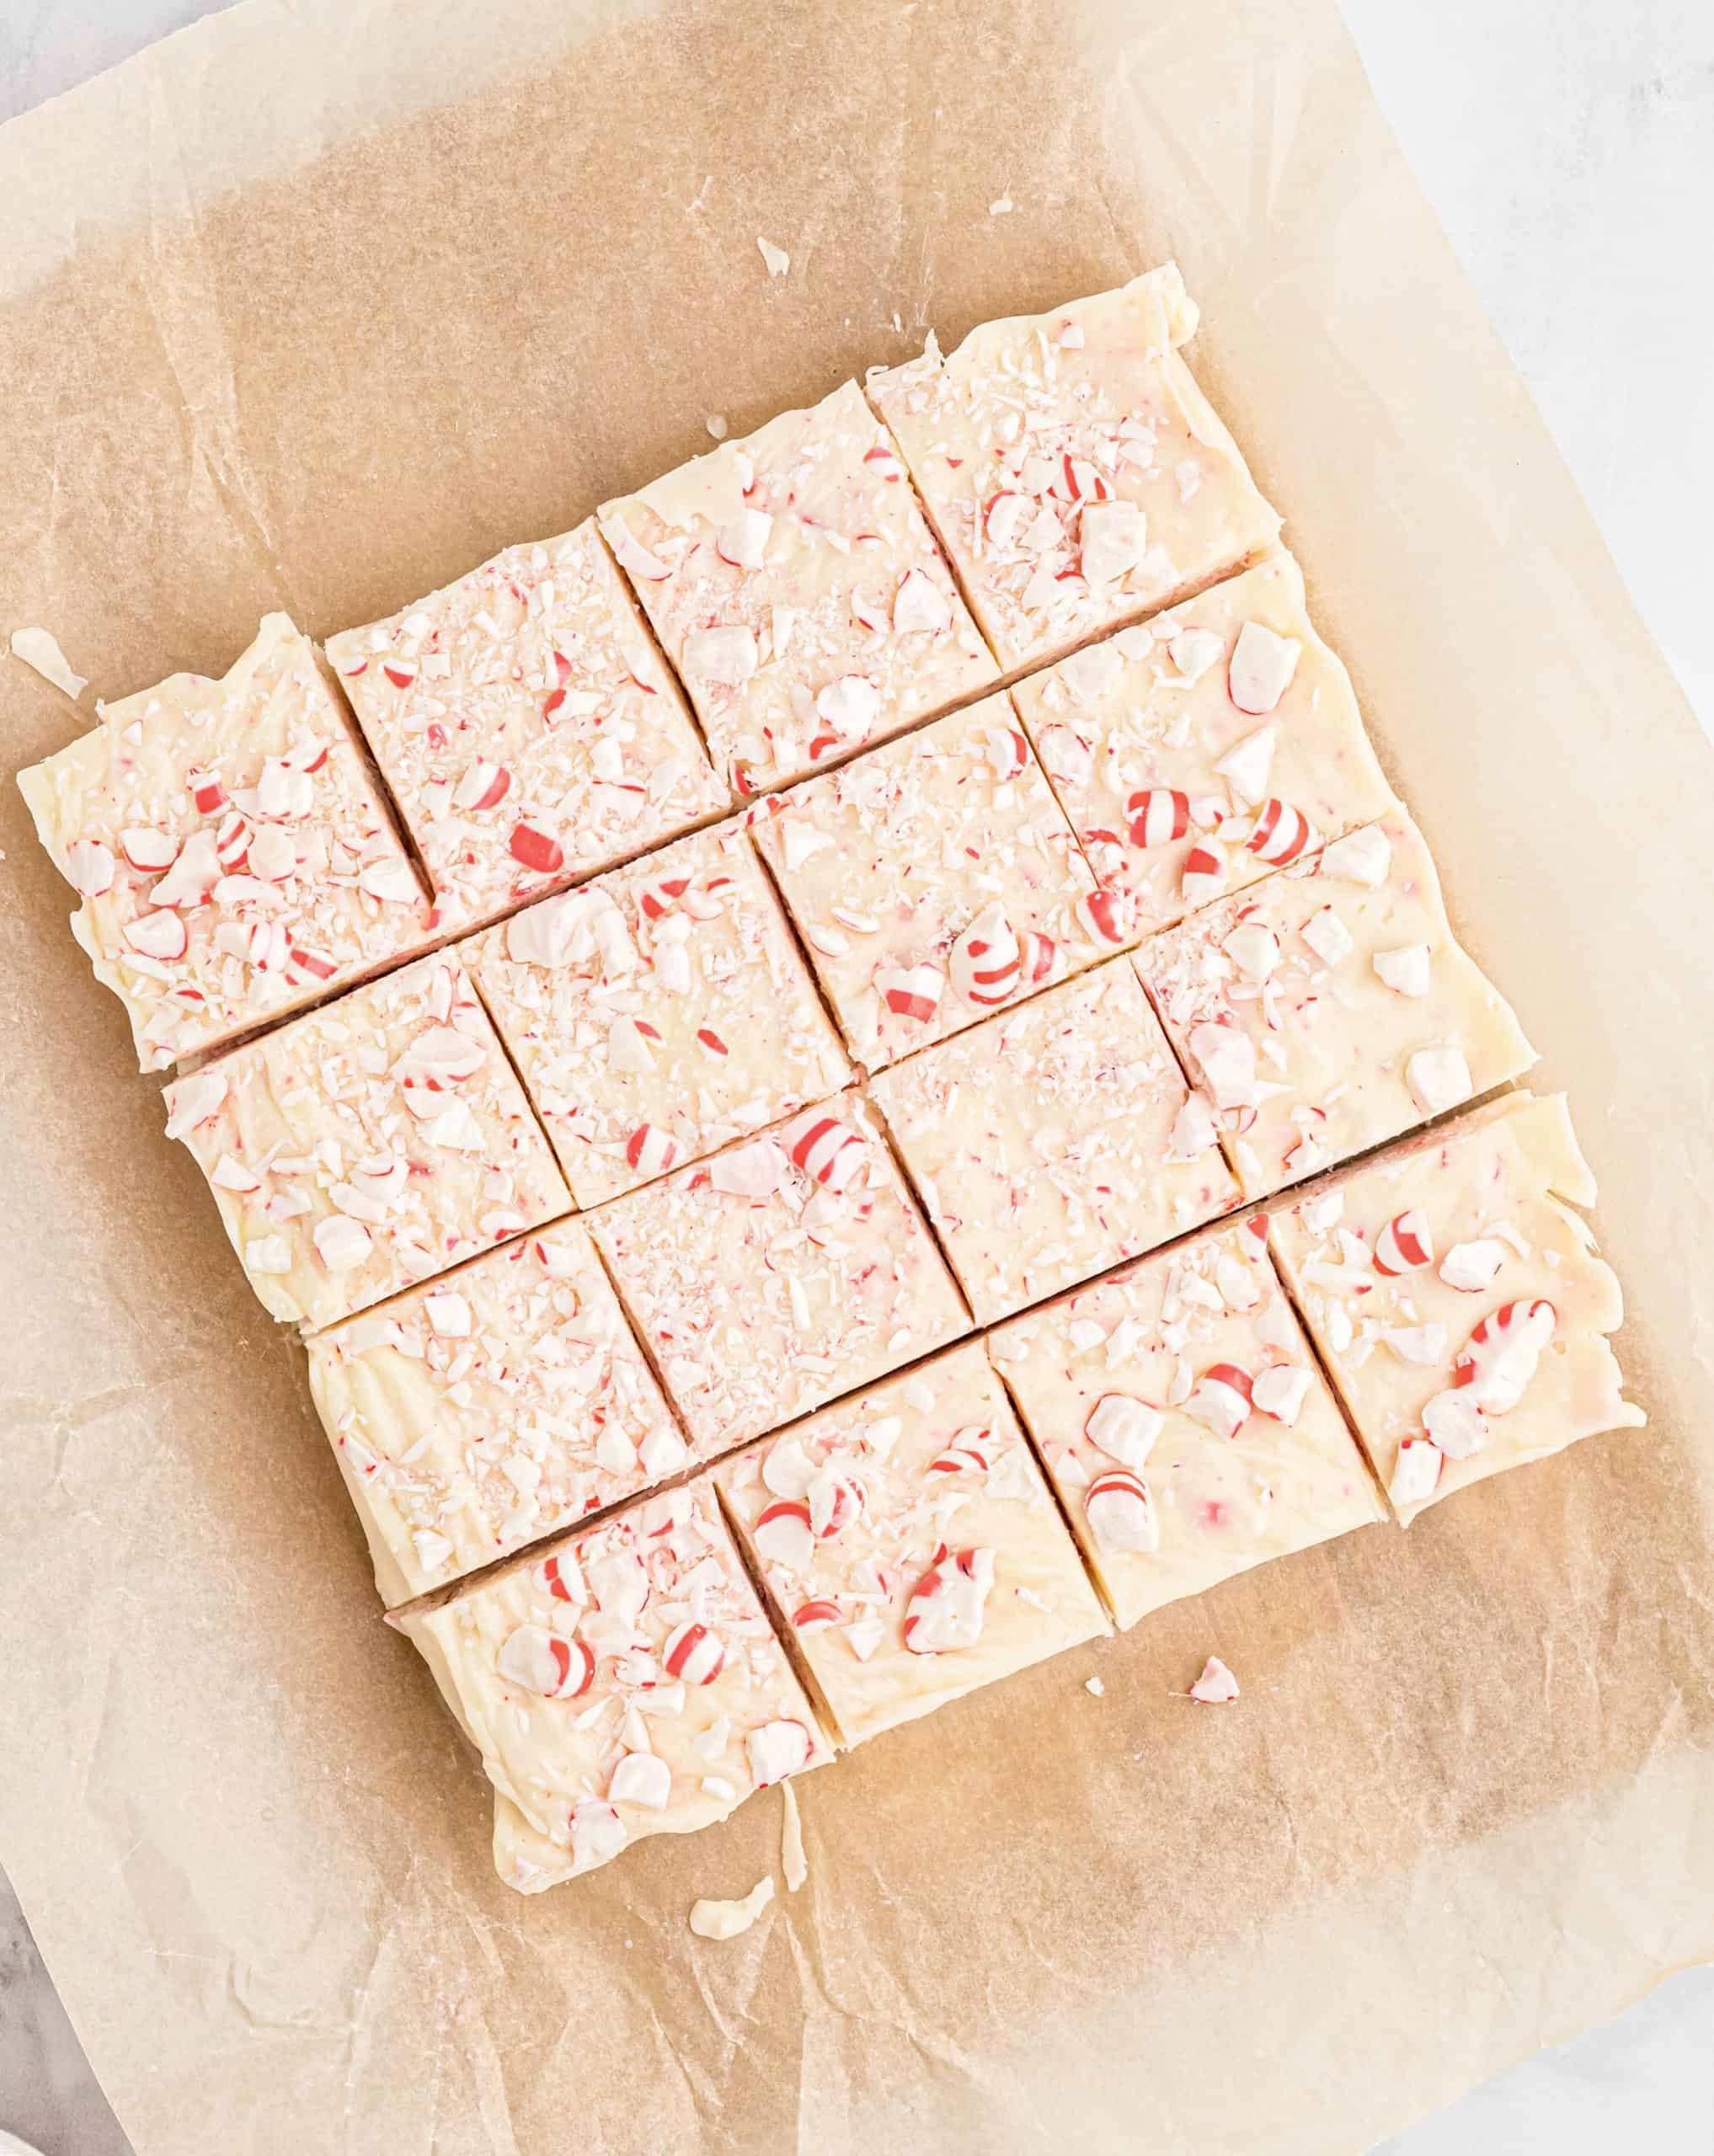 peppermint fudge fully cooled and cut into 12 squares.